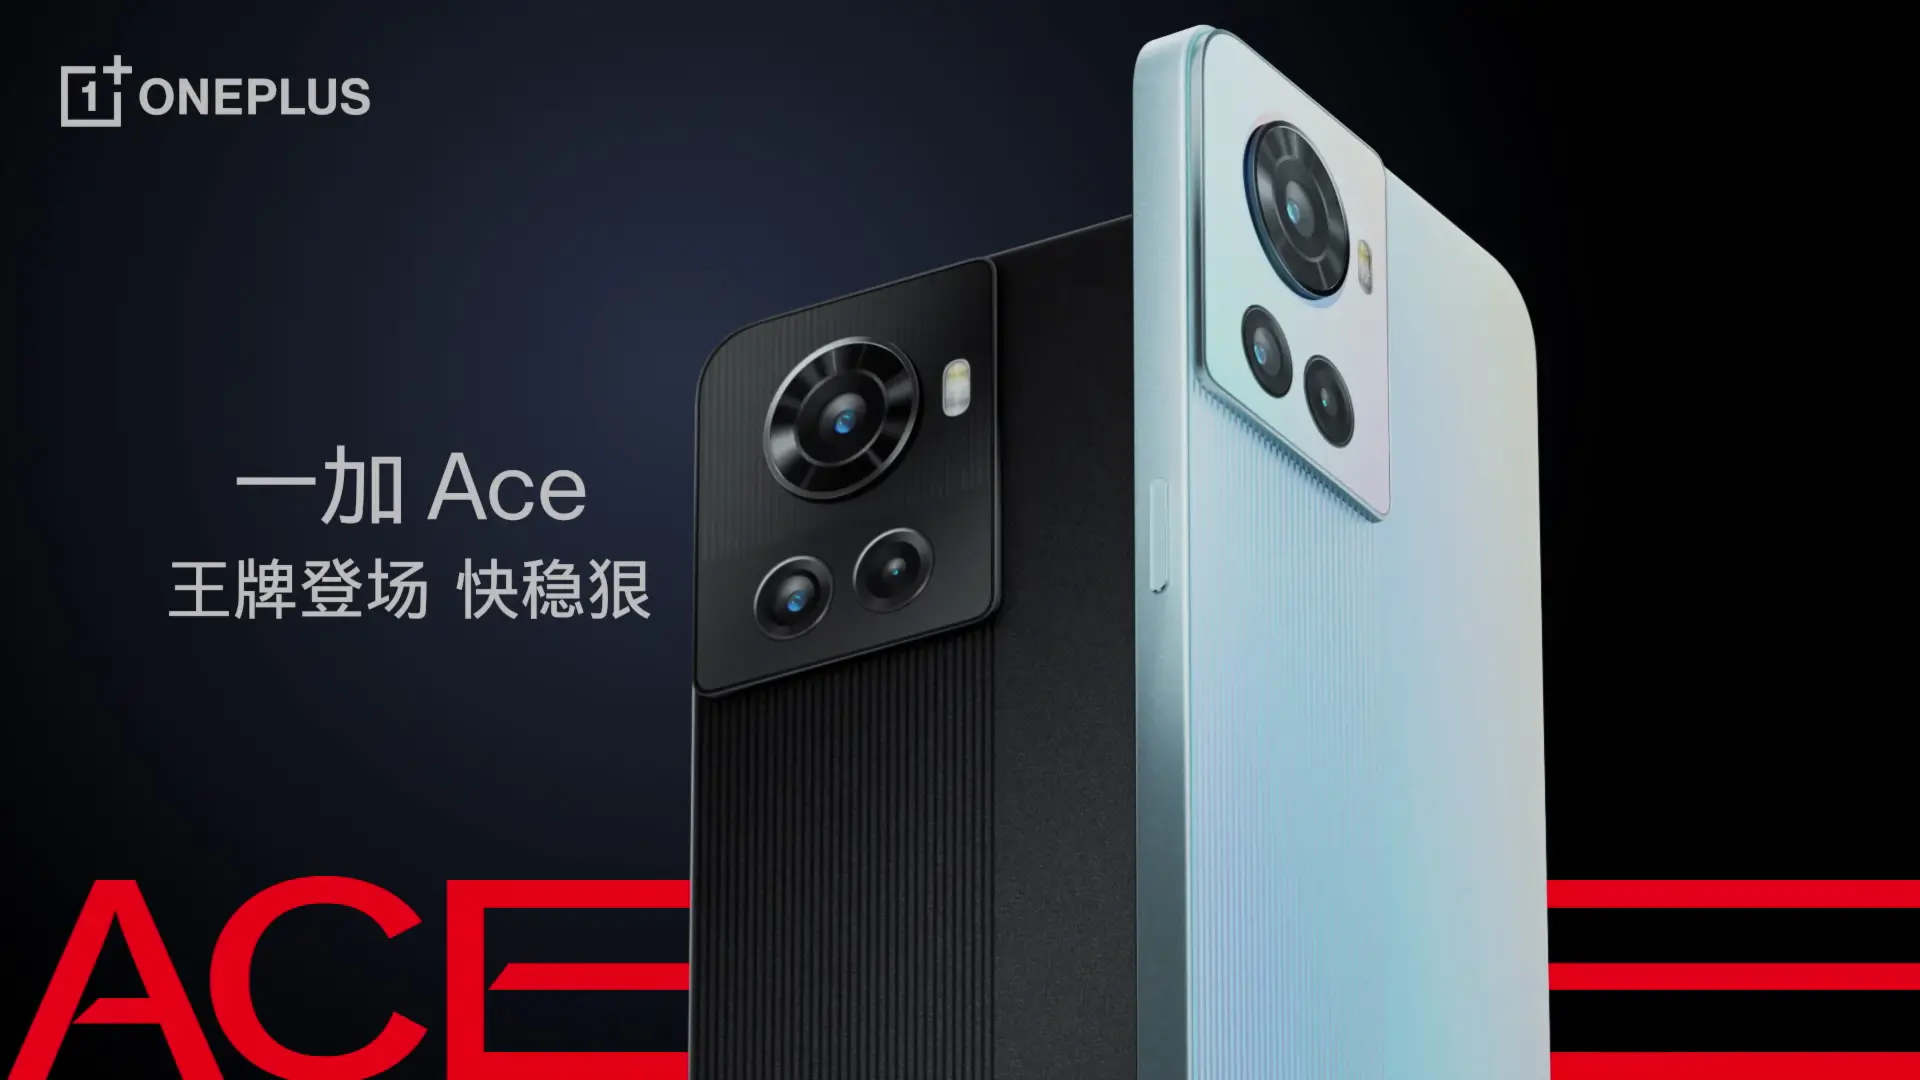 https://phandroid.com/wp-content/uploads/2022/04/oneplus-ace-3.png